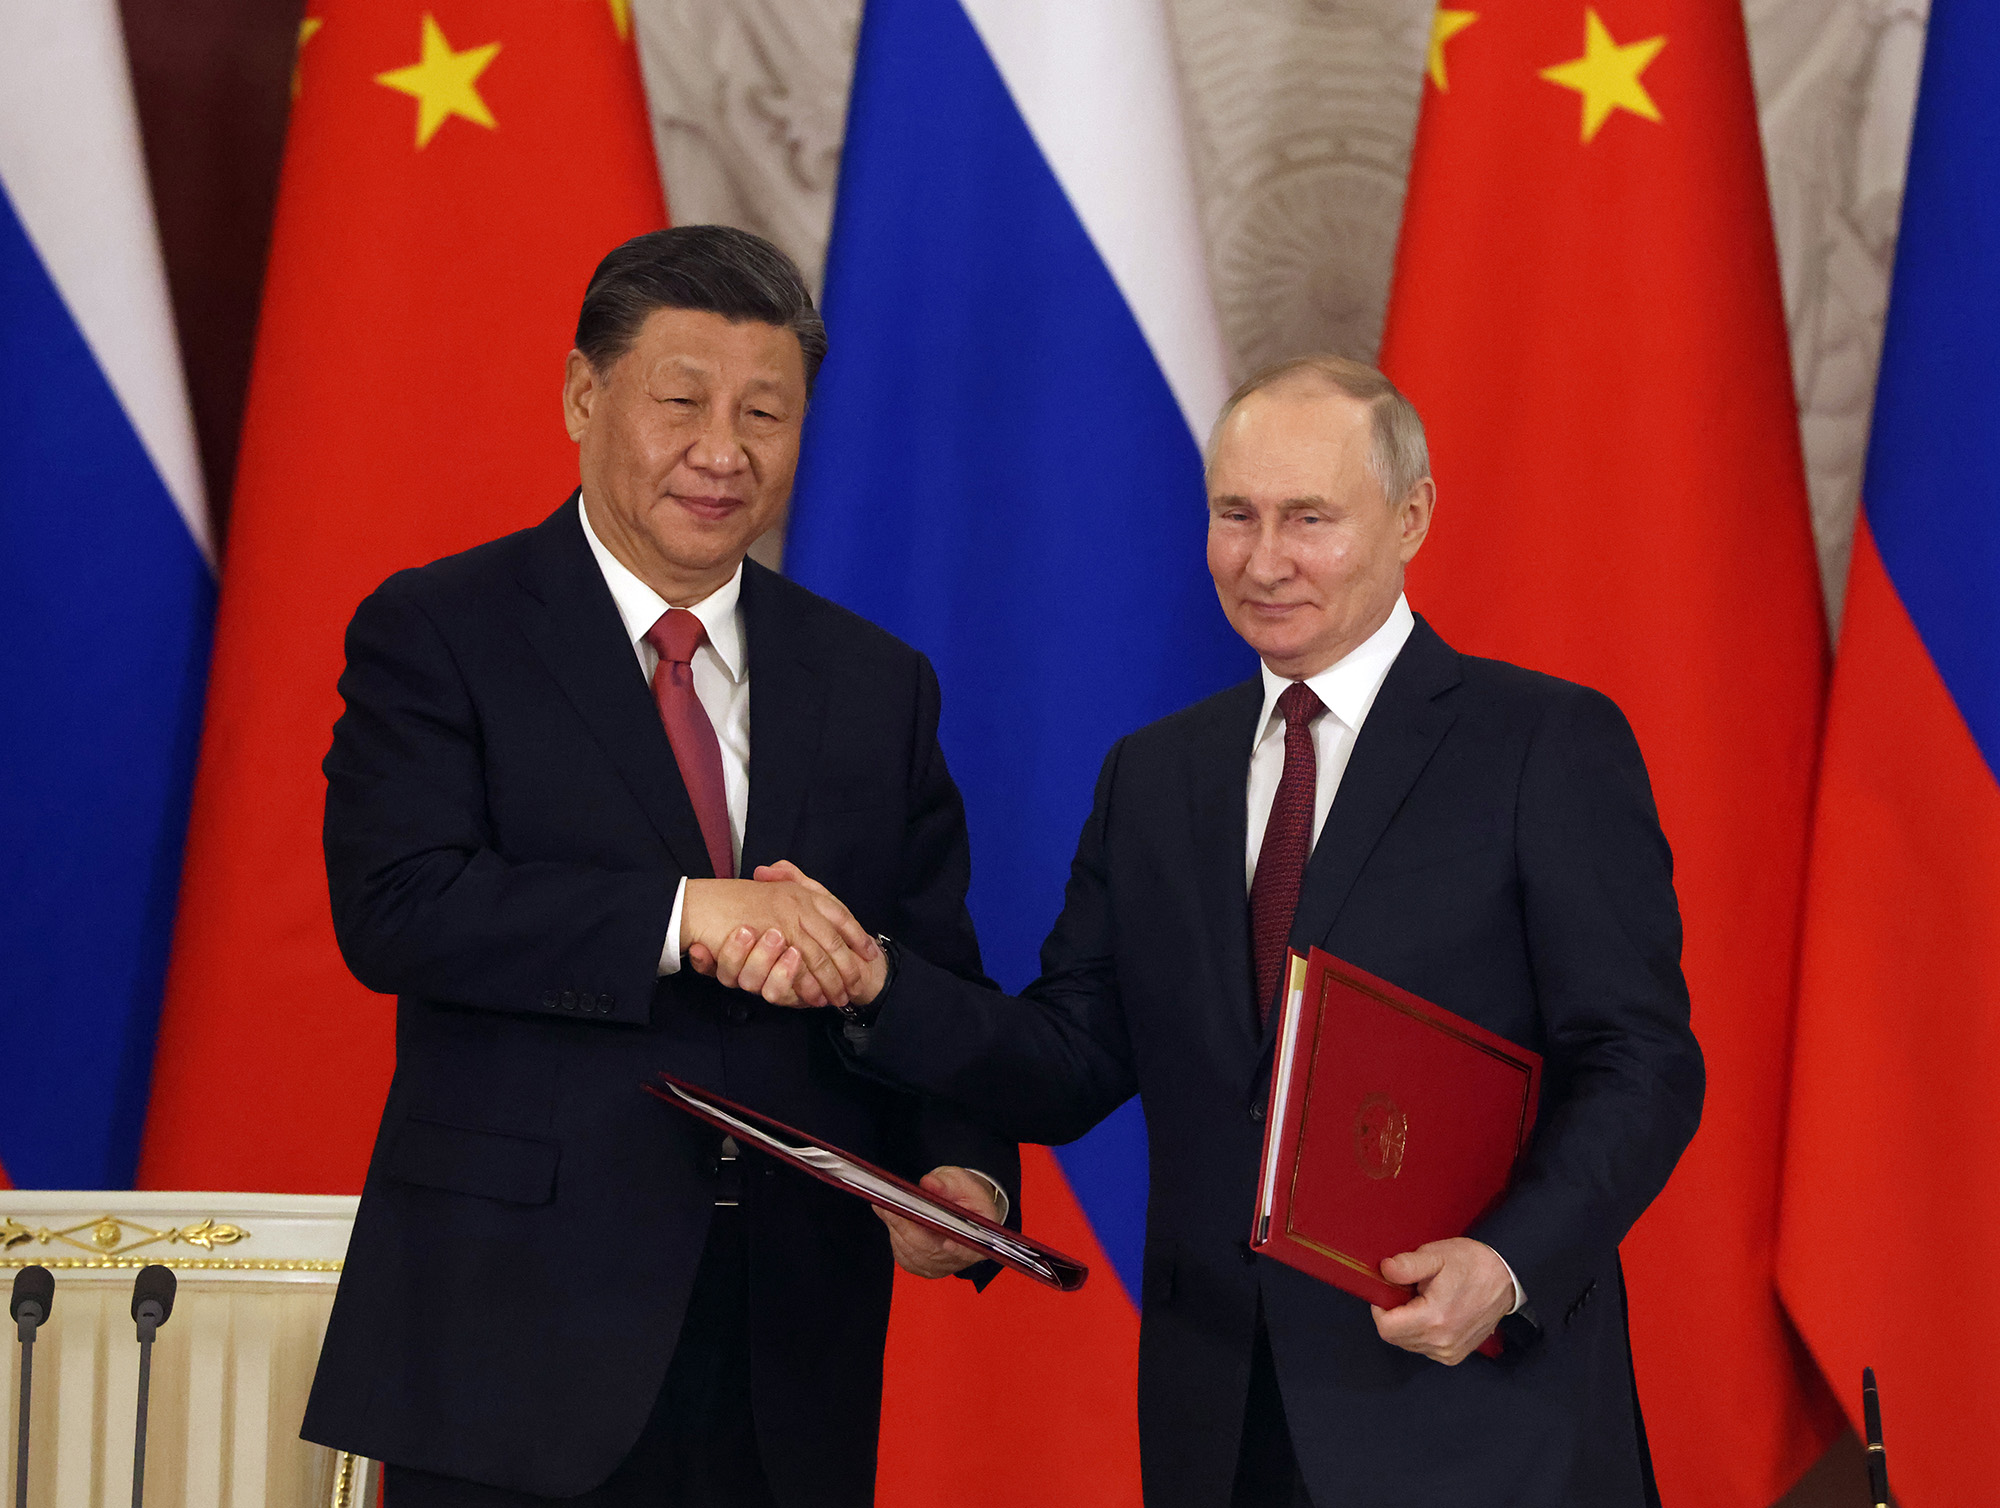 Chinese President Xi Jinping, left, and Russian President Vladimir Putin shake hands during a document signing ceremony at the Grand Kremlin Palace in Moscow, Russia, on March 21.